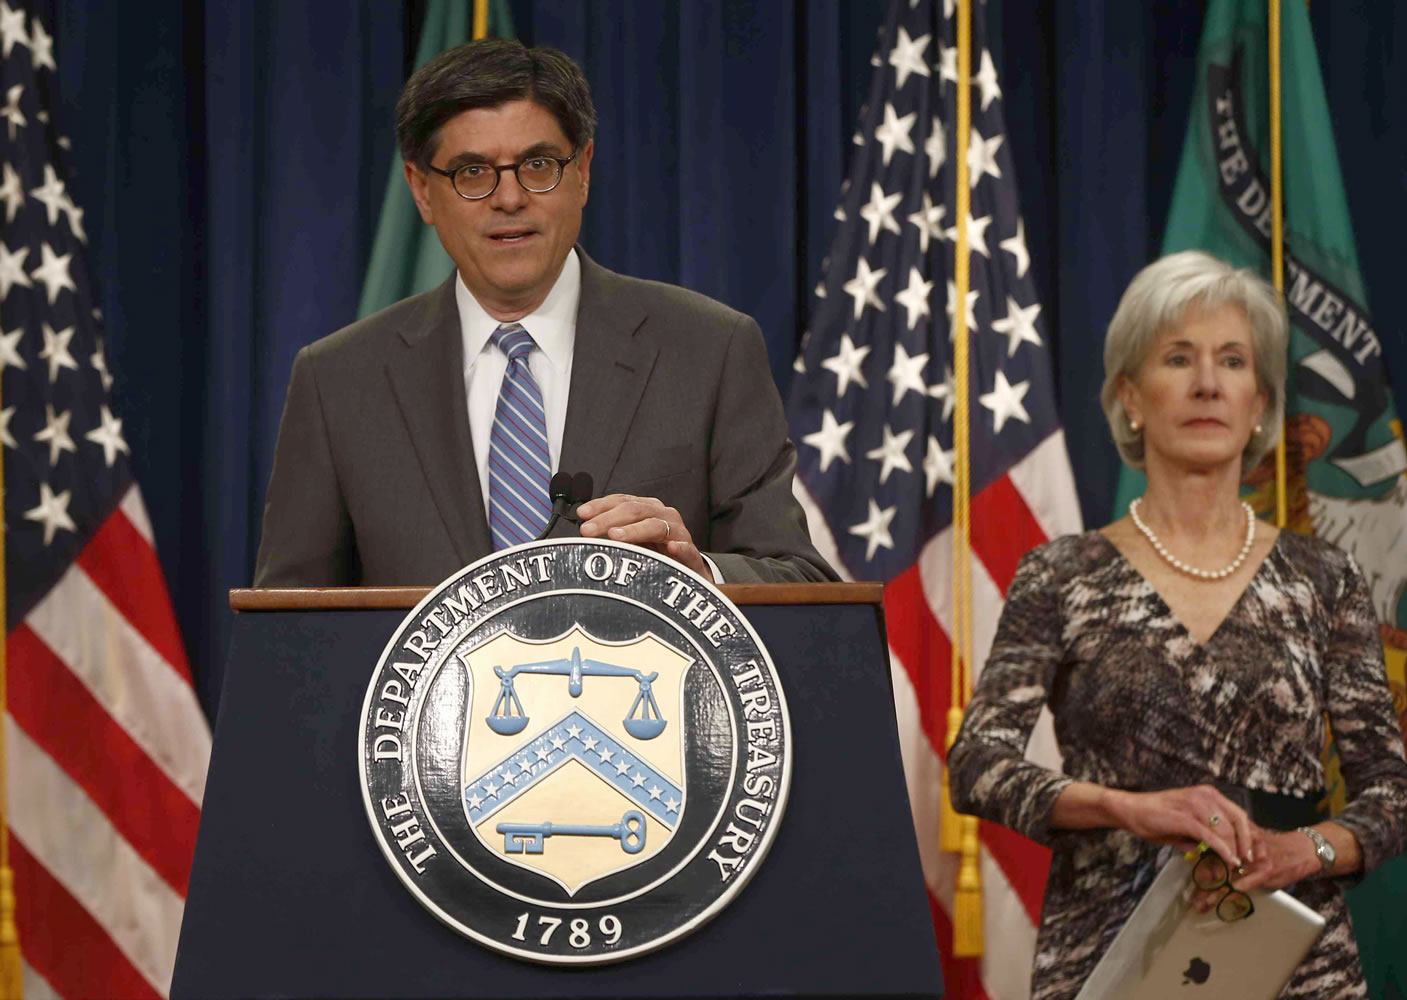 Treasury Secretary Jacob Lew, accompanied by Health and Human Services Secretary Kathleen Sebelius, speaks about Social Security and Medicare on Friday at the Treasury Department in Washington. The government says Medicare's giant hospital trust will not be exhausted until 2026, while the date that Social Security will exhaust its trust fund is unchanged at 2033.